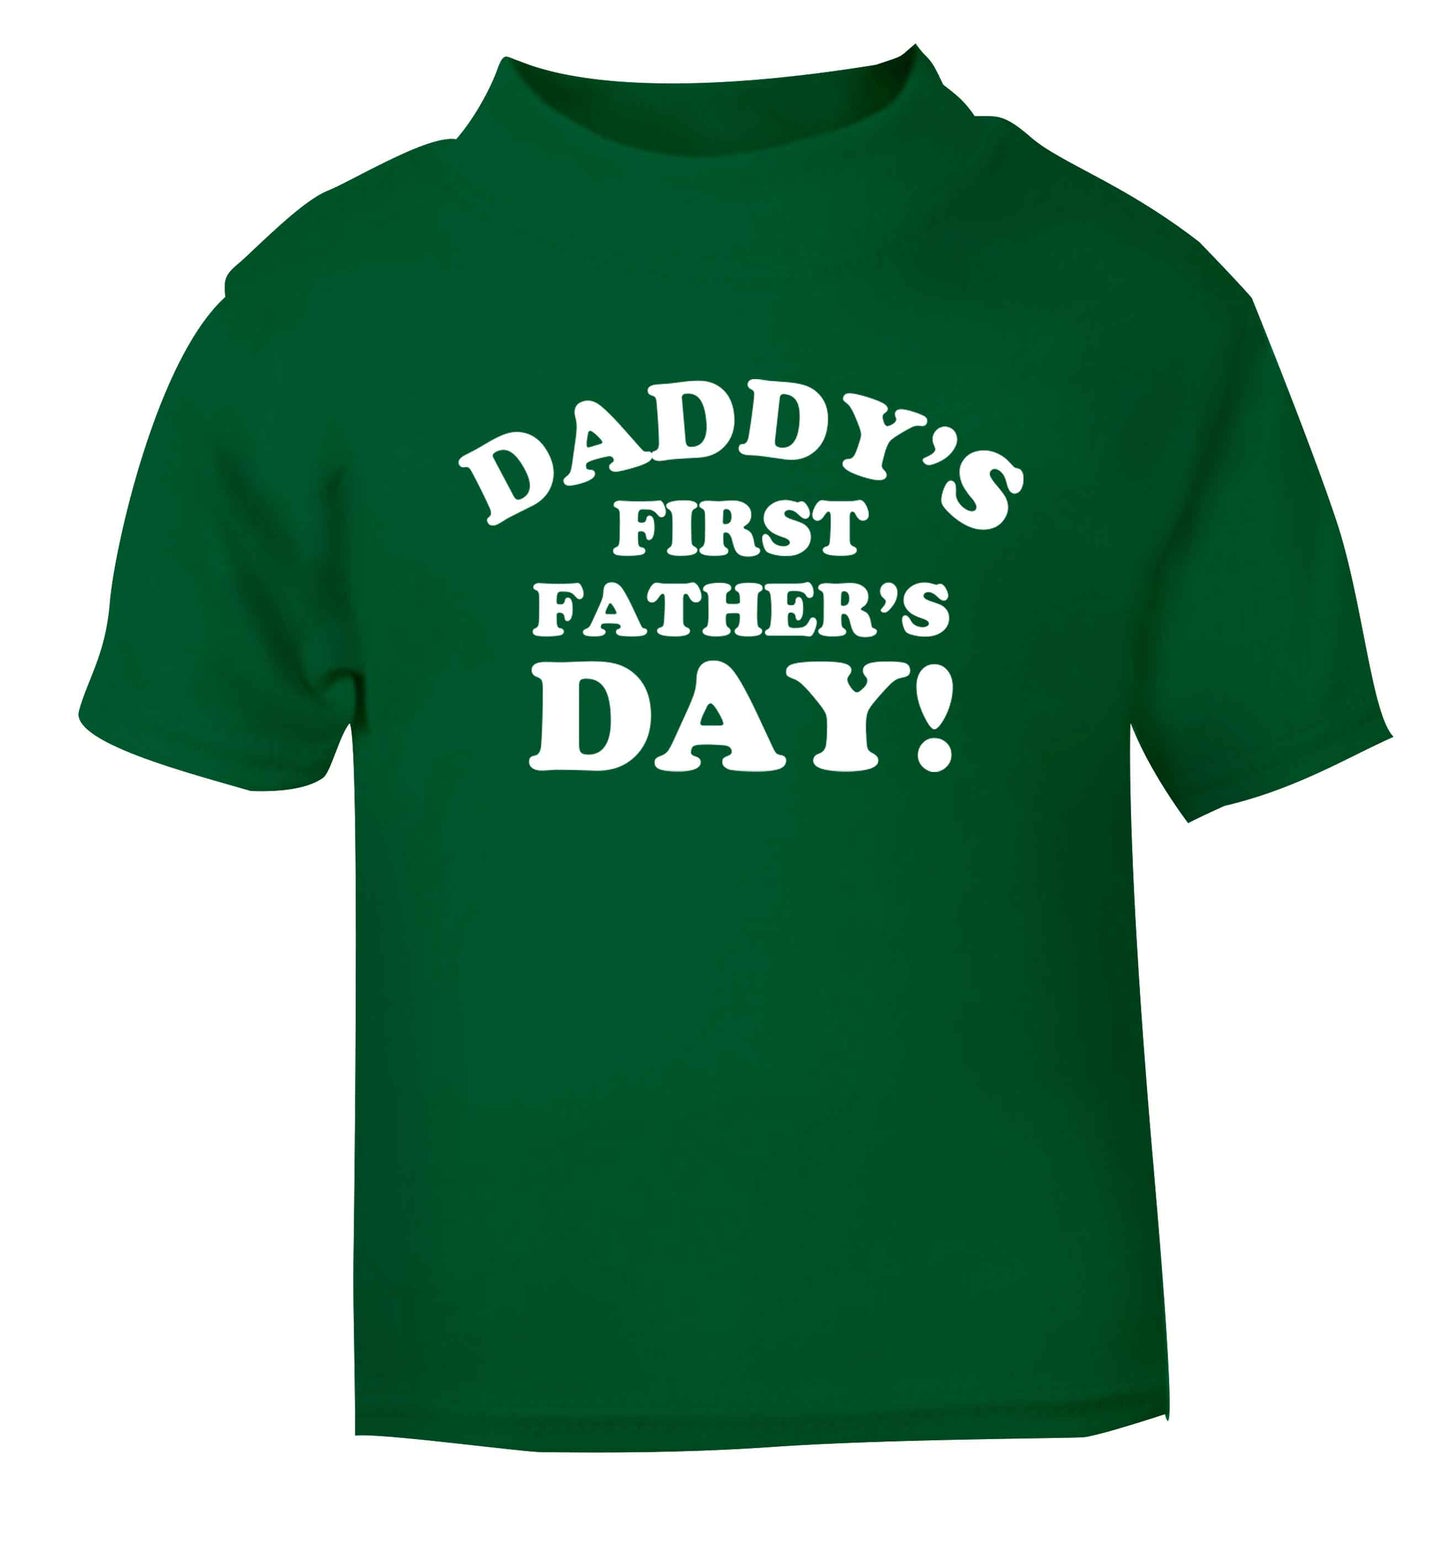 Daddy's first father's day green baby toddler Tshirt 2 Years